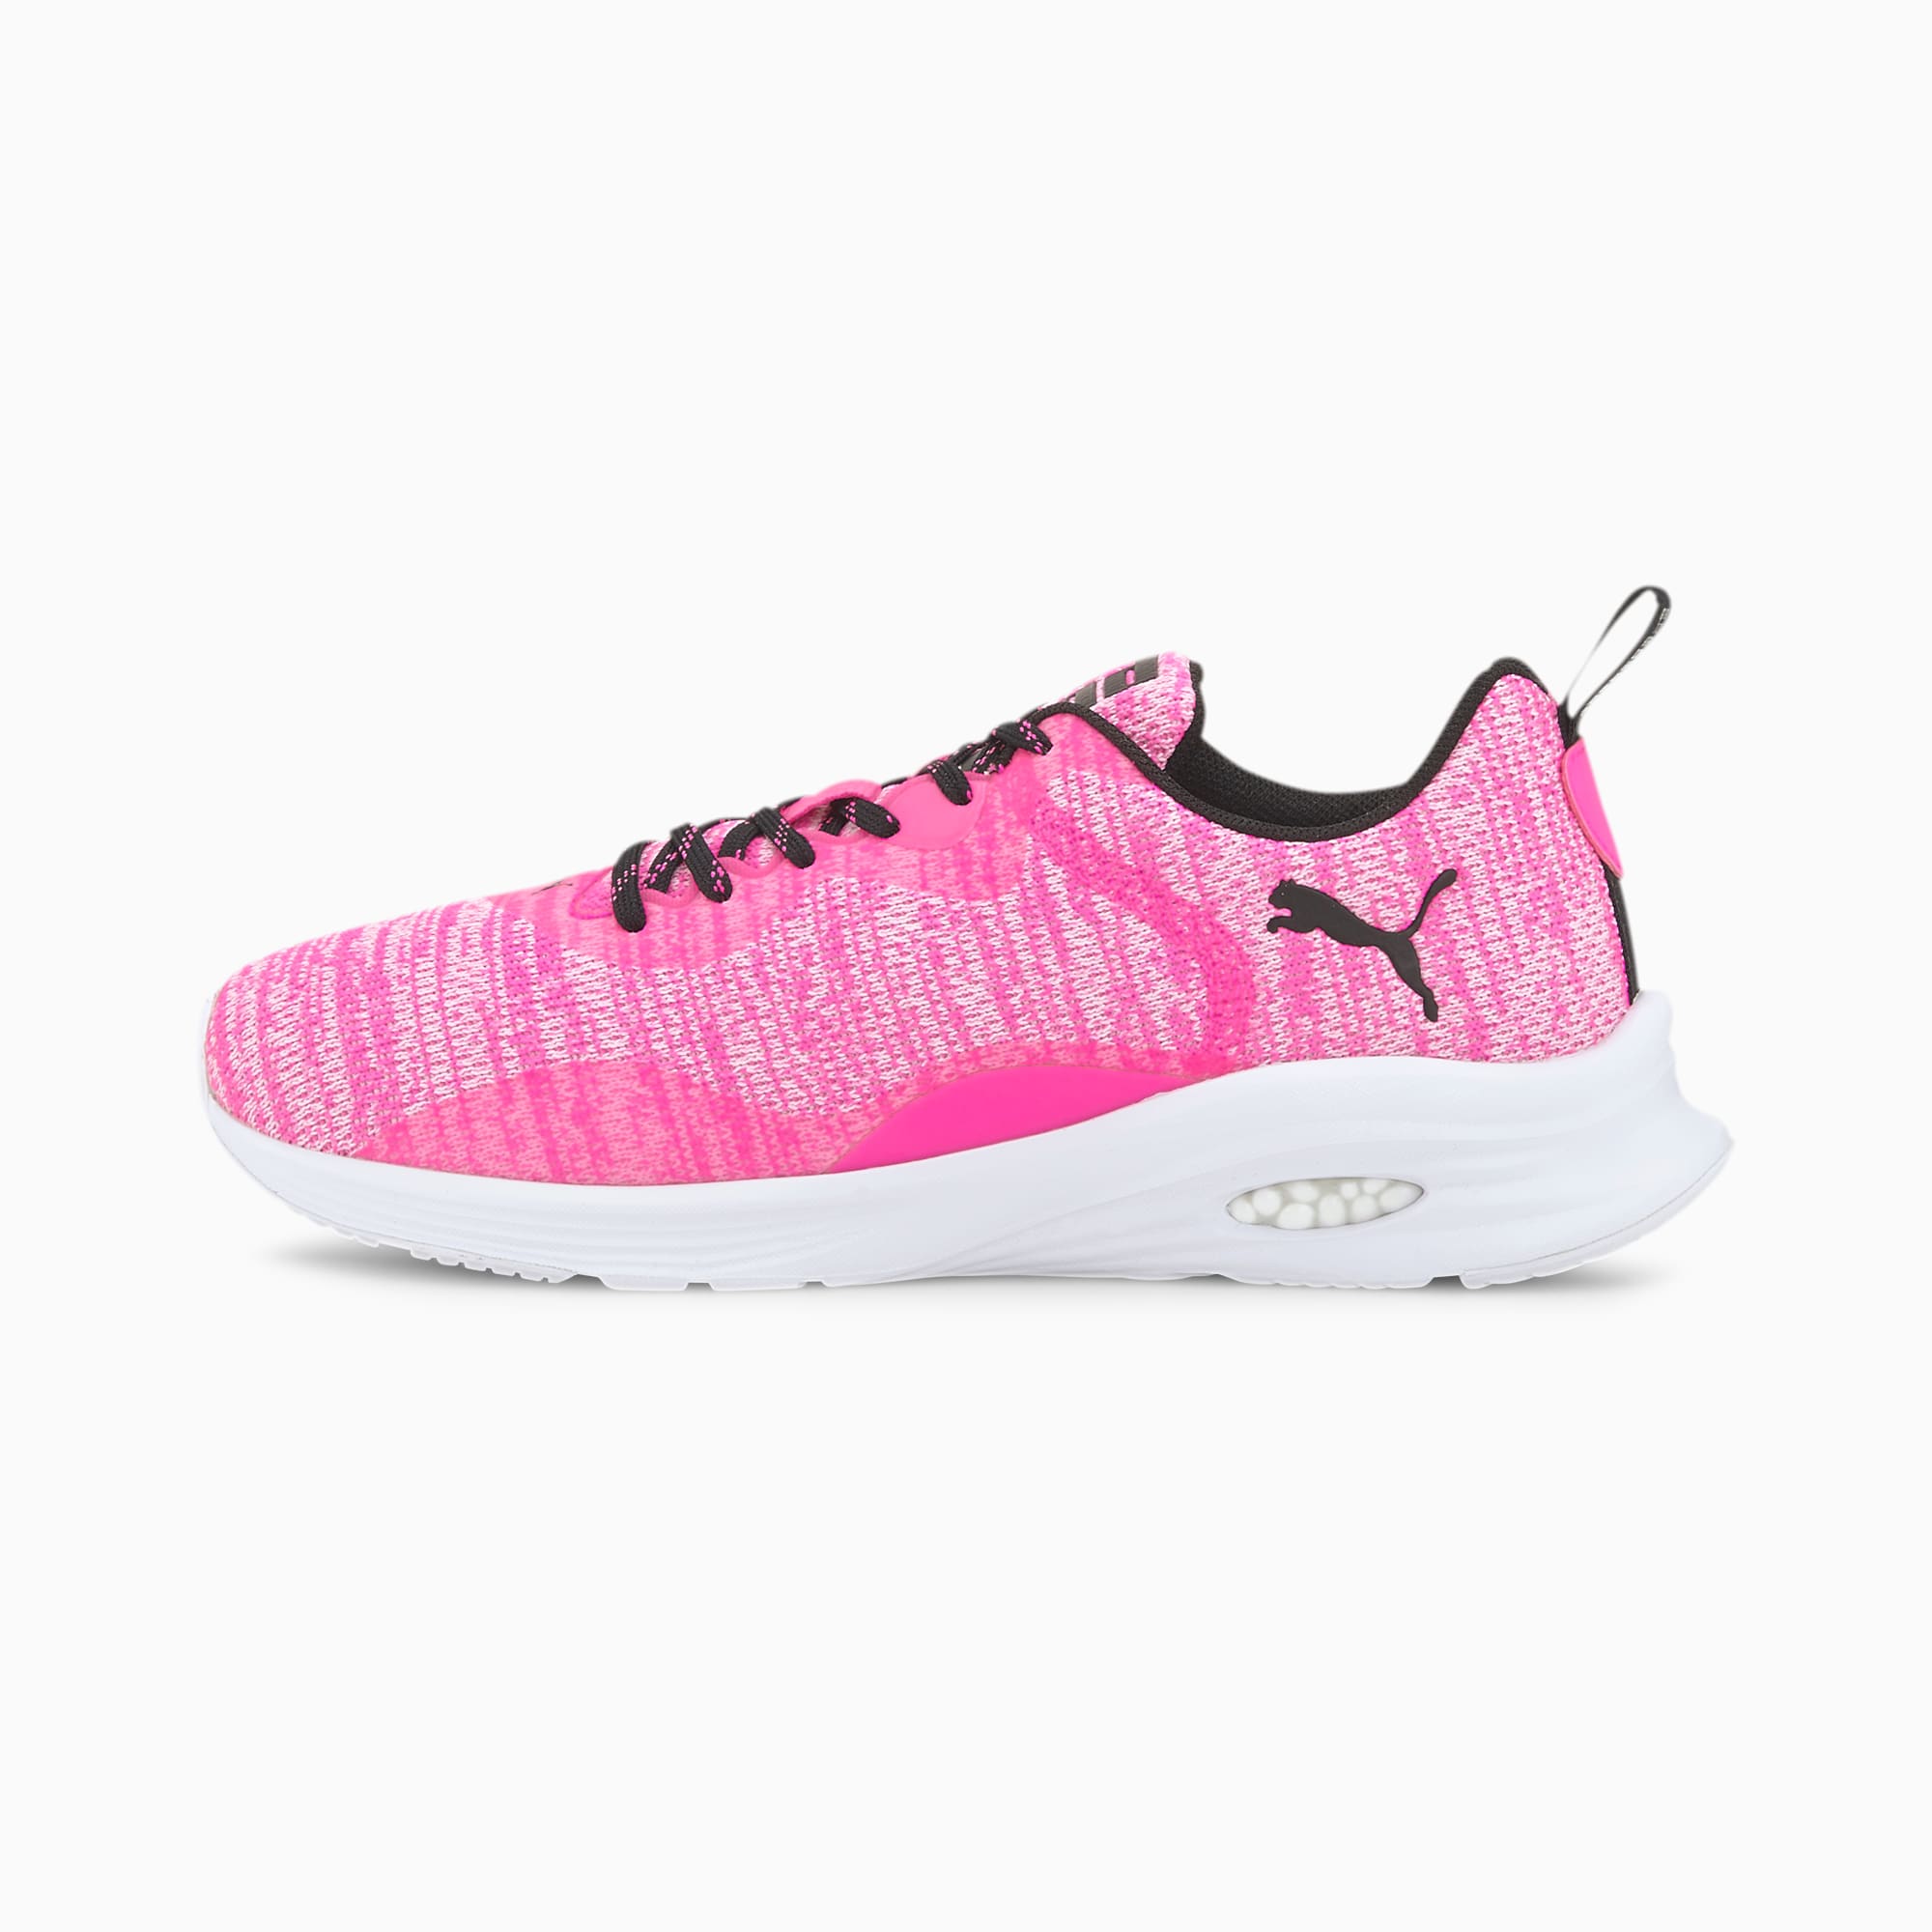 HYBRID Fuego Knit Women's Running Shoes 